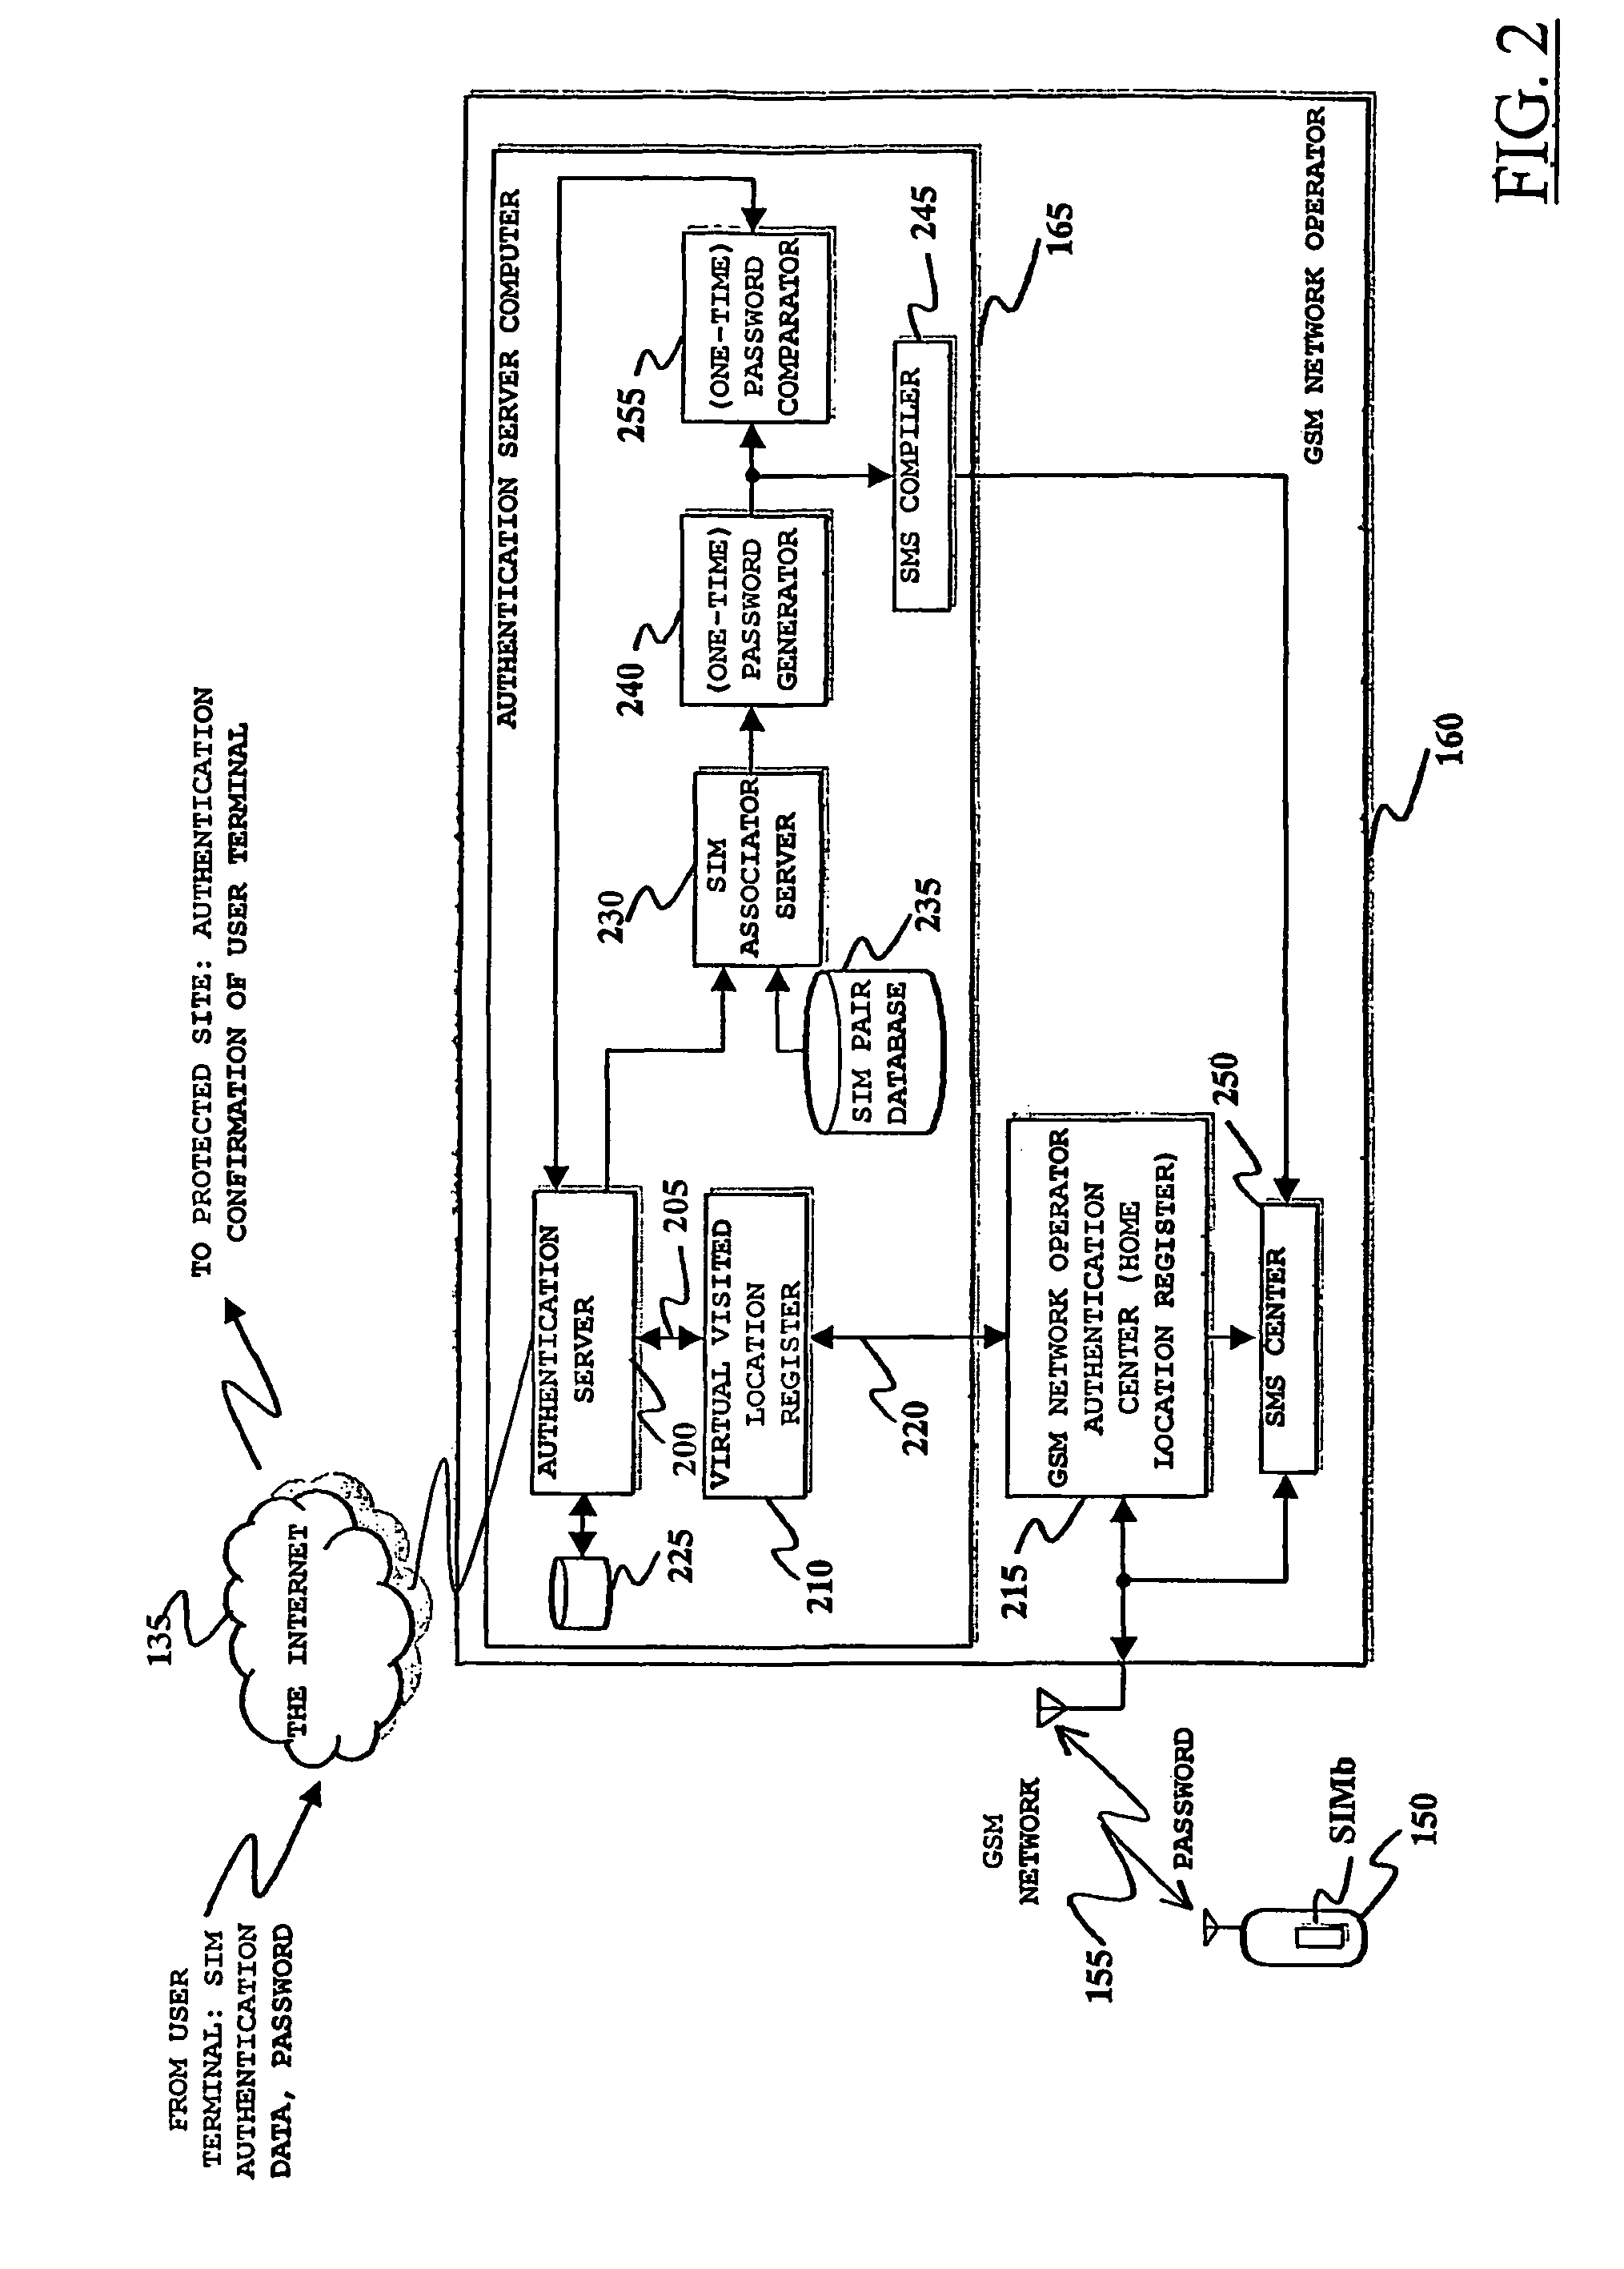 Method and system for the authentication of a user of a data processing system